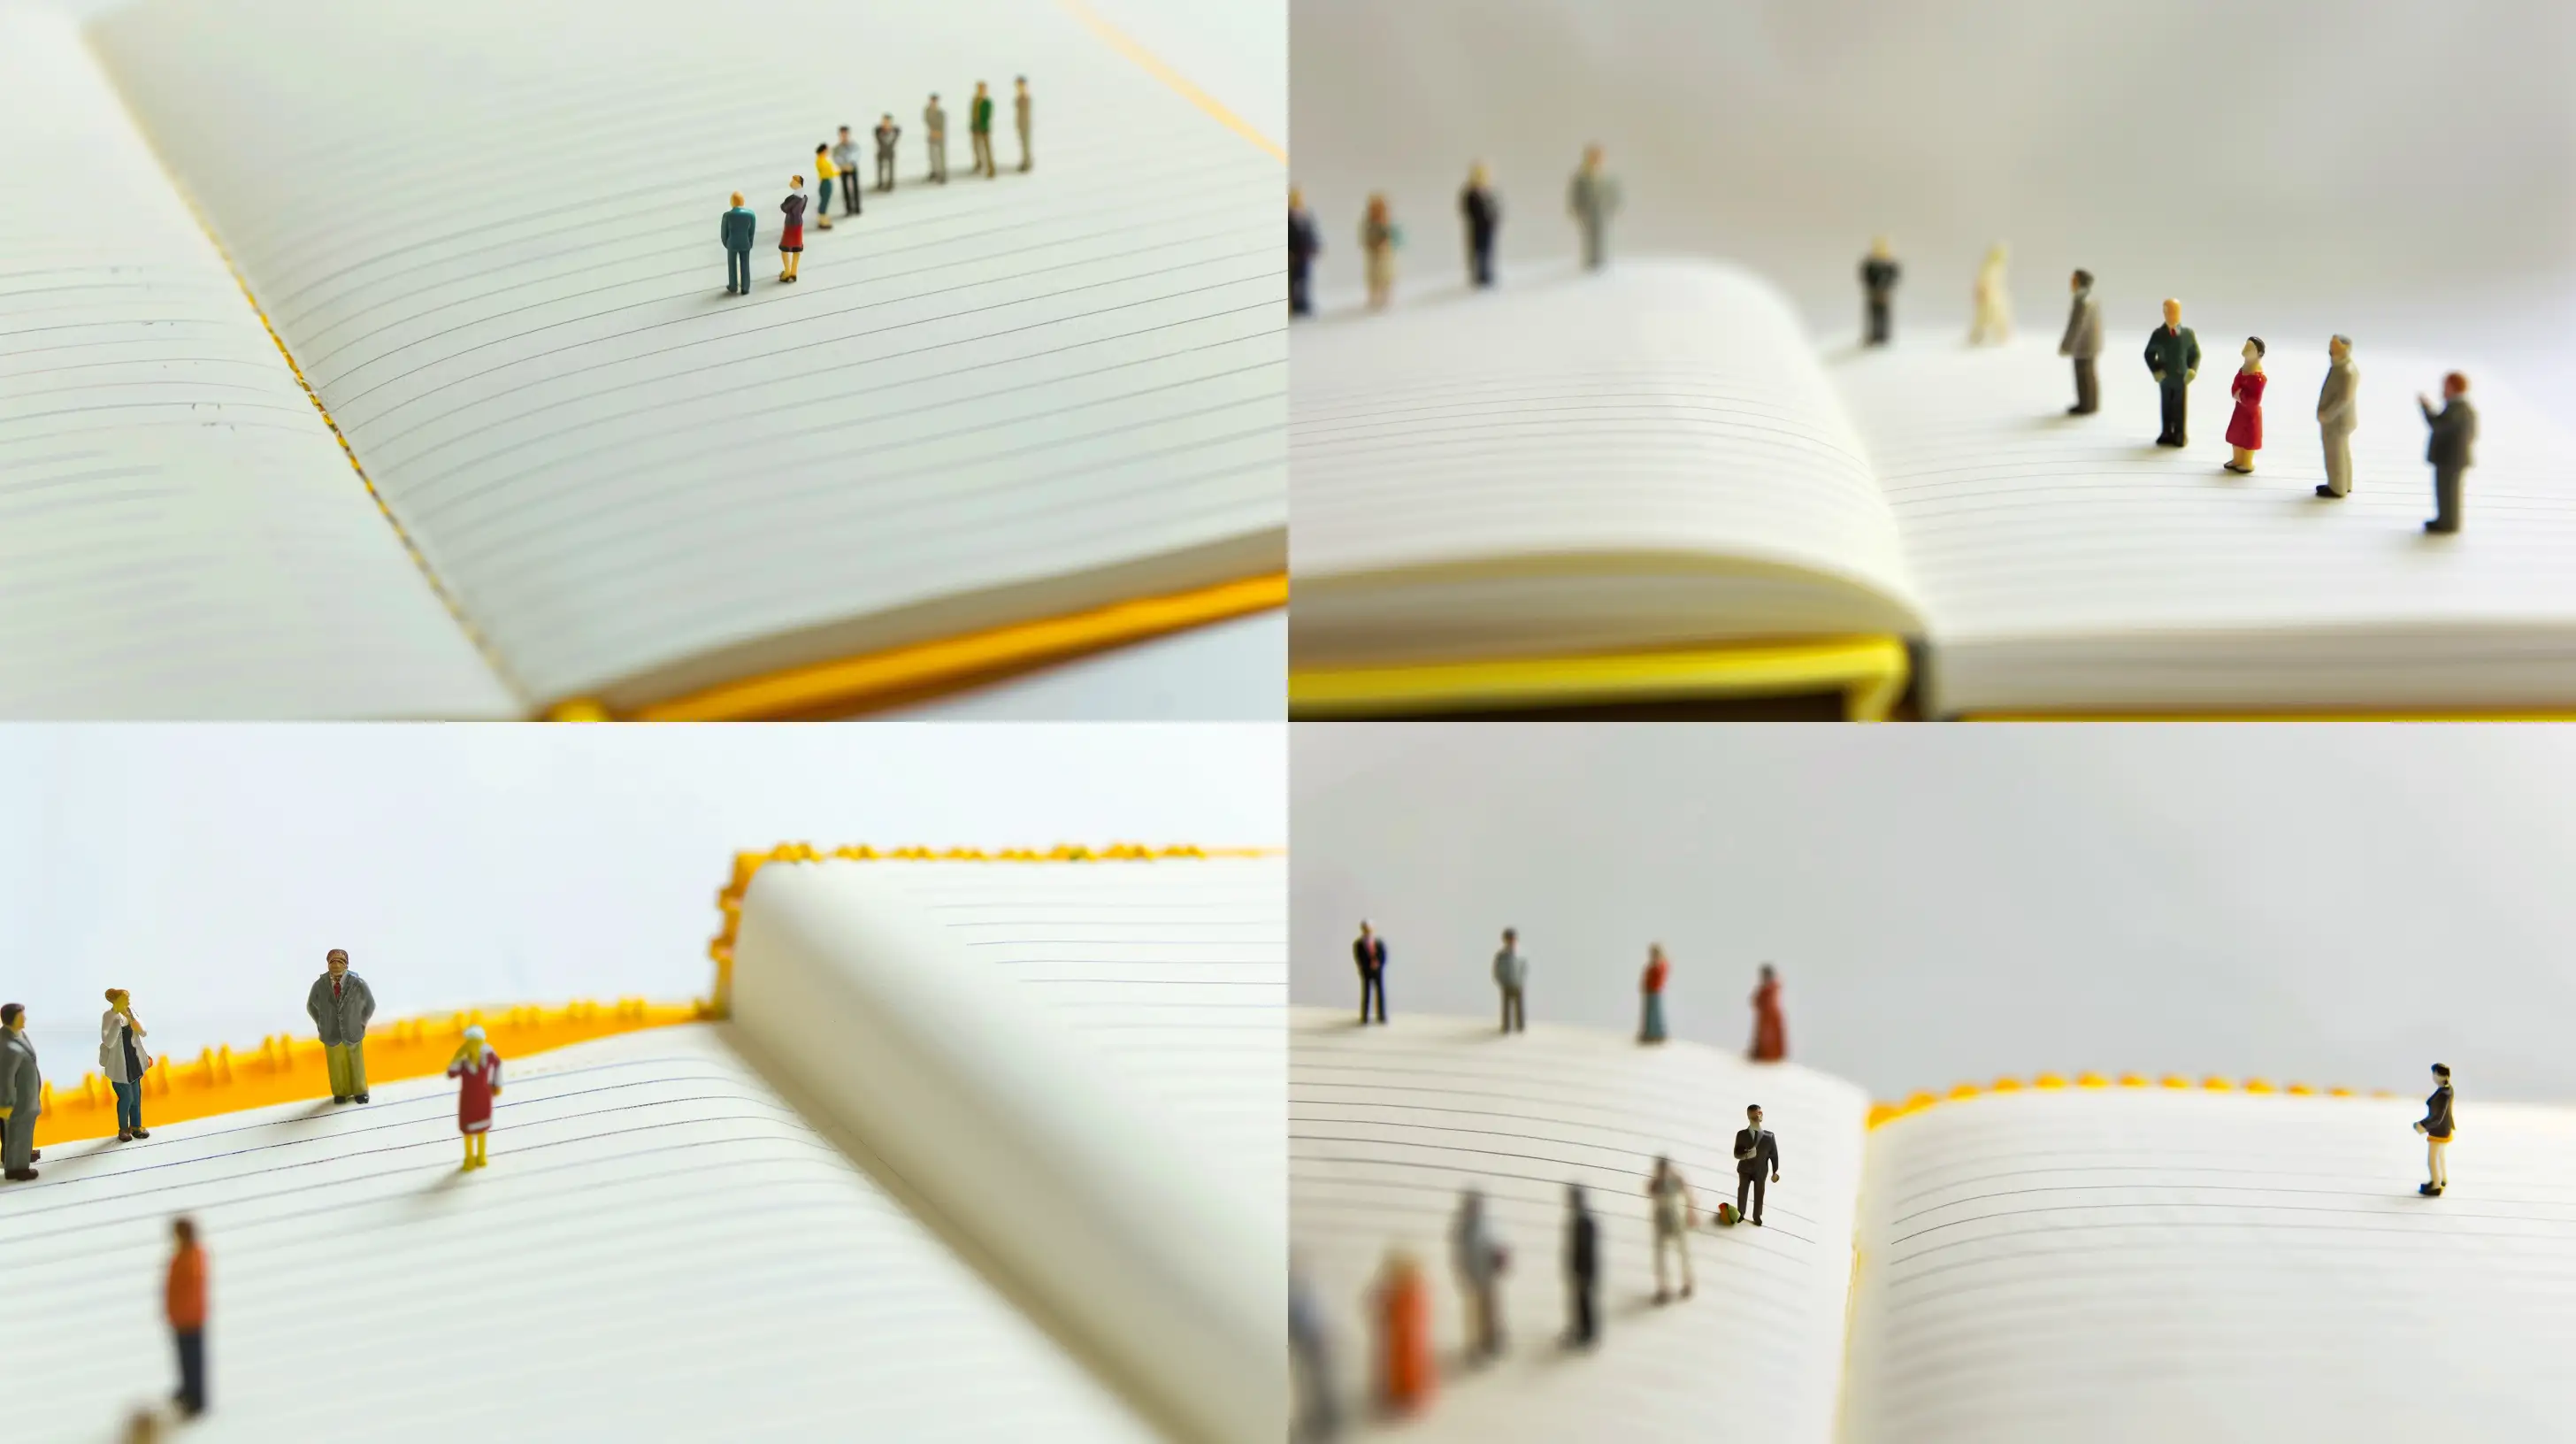 Create a minimalist image featuring small figurines of people, each dressed differently, lined up on an open notebook with lined pages. The background should be bright and predominantly white, emphasizing the simplicity and focus on the figurines. The notebook should have a distinctive yellow edge, adding a subtle pop of color to the composition. This setup should evoke the concept of organization, planning, or human resources in a subtle, artistic way --ar 16:9